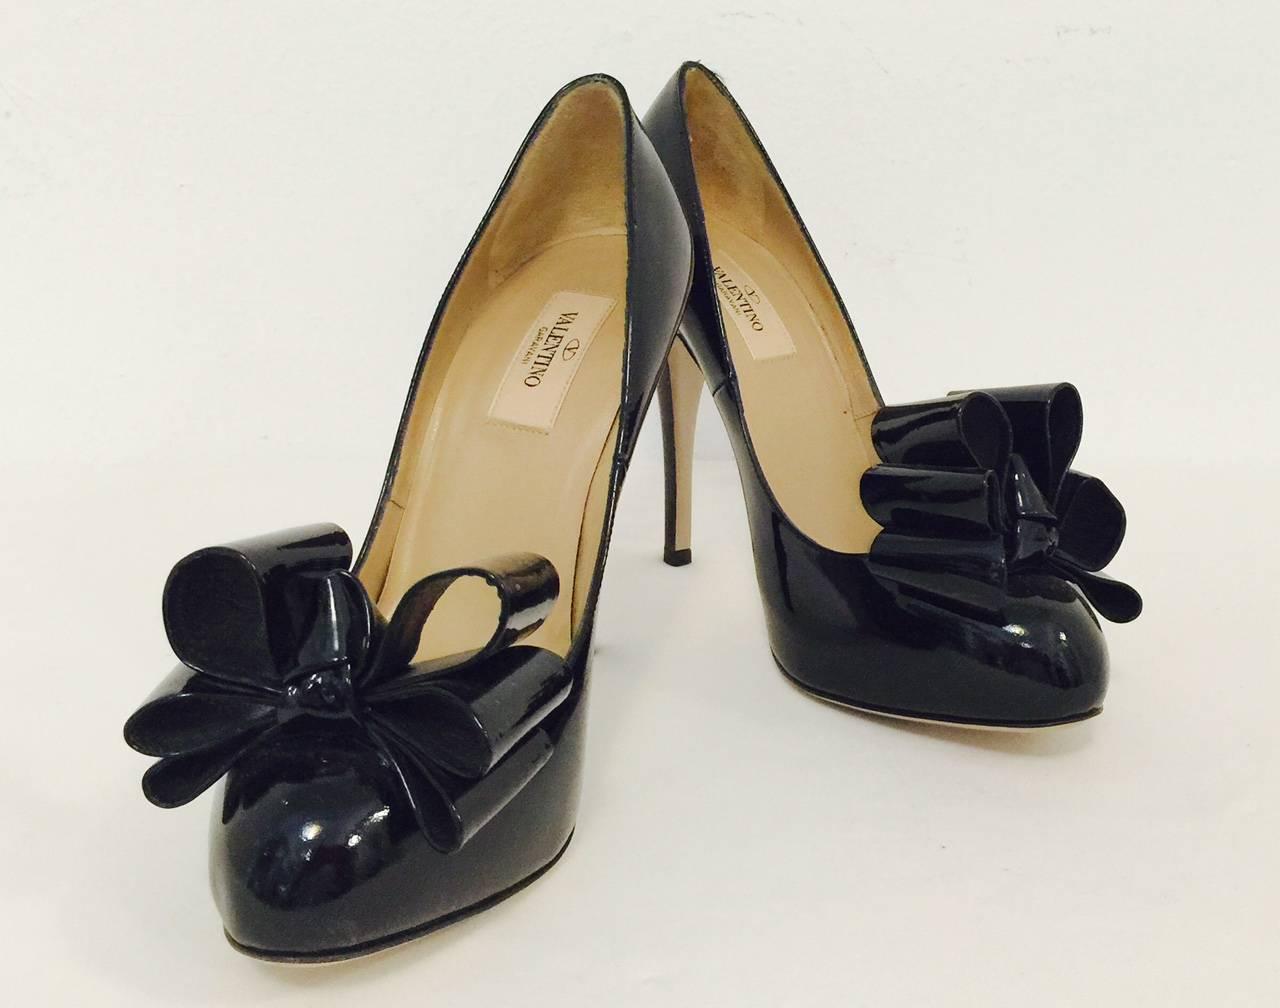 Black Patent Leather High Heel Pumps are typical Valentino... Feminine, flirty, and fit for any siren!  Features ultra-luxurious patent leather, covered platform and three-tiered bow decoration.  Leather soles, insoles and lining.  Made in Italy.